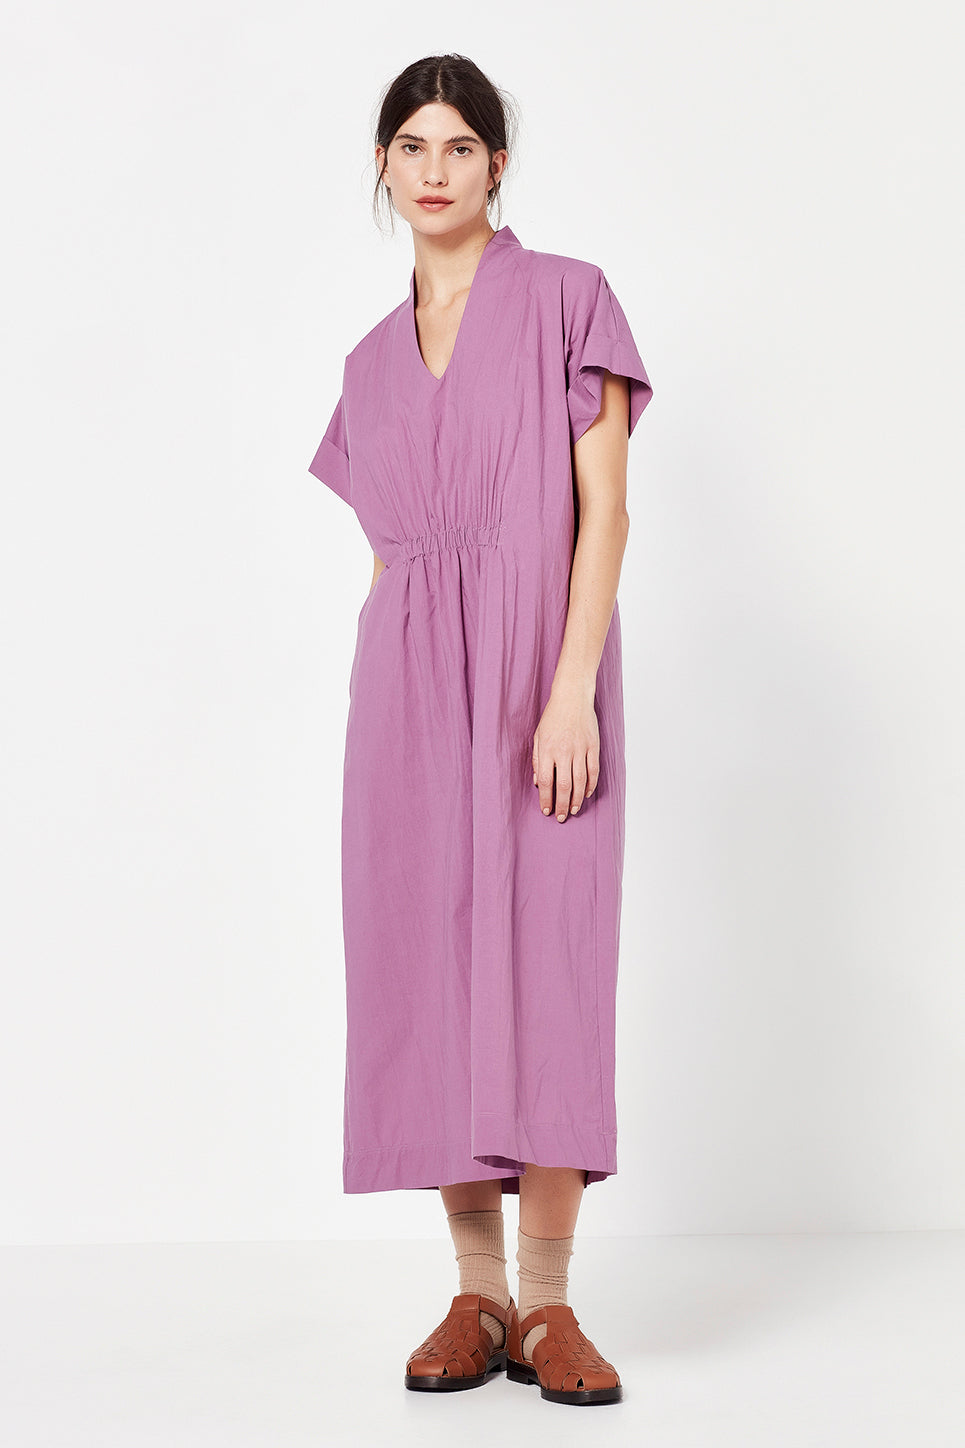 The Cordelia Dress in Orchid